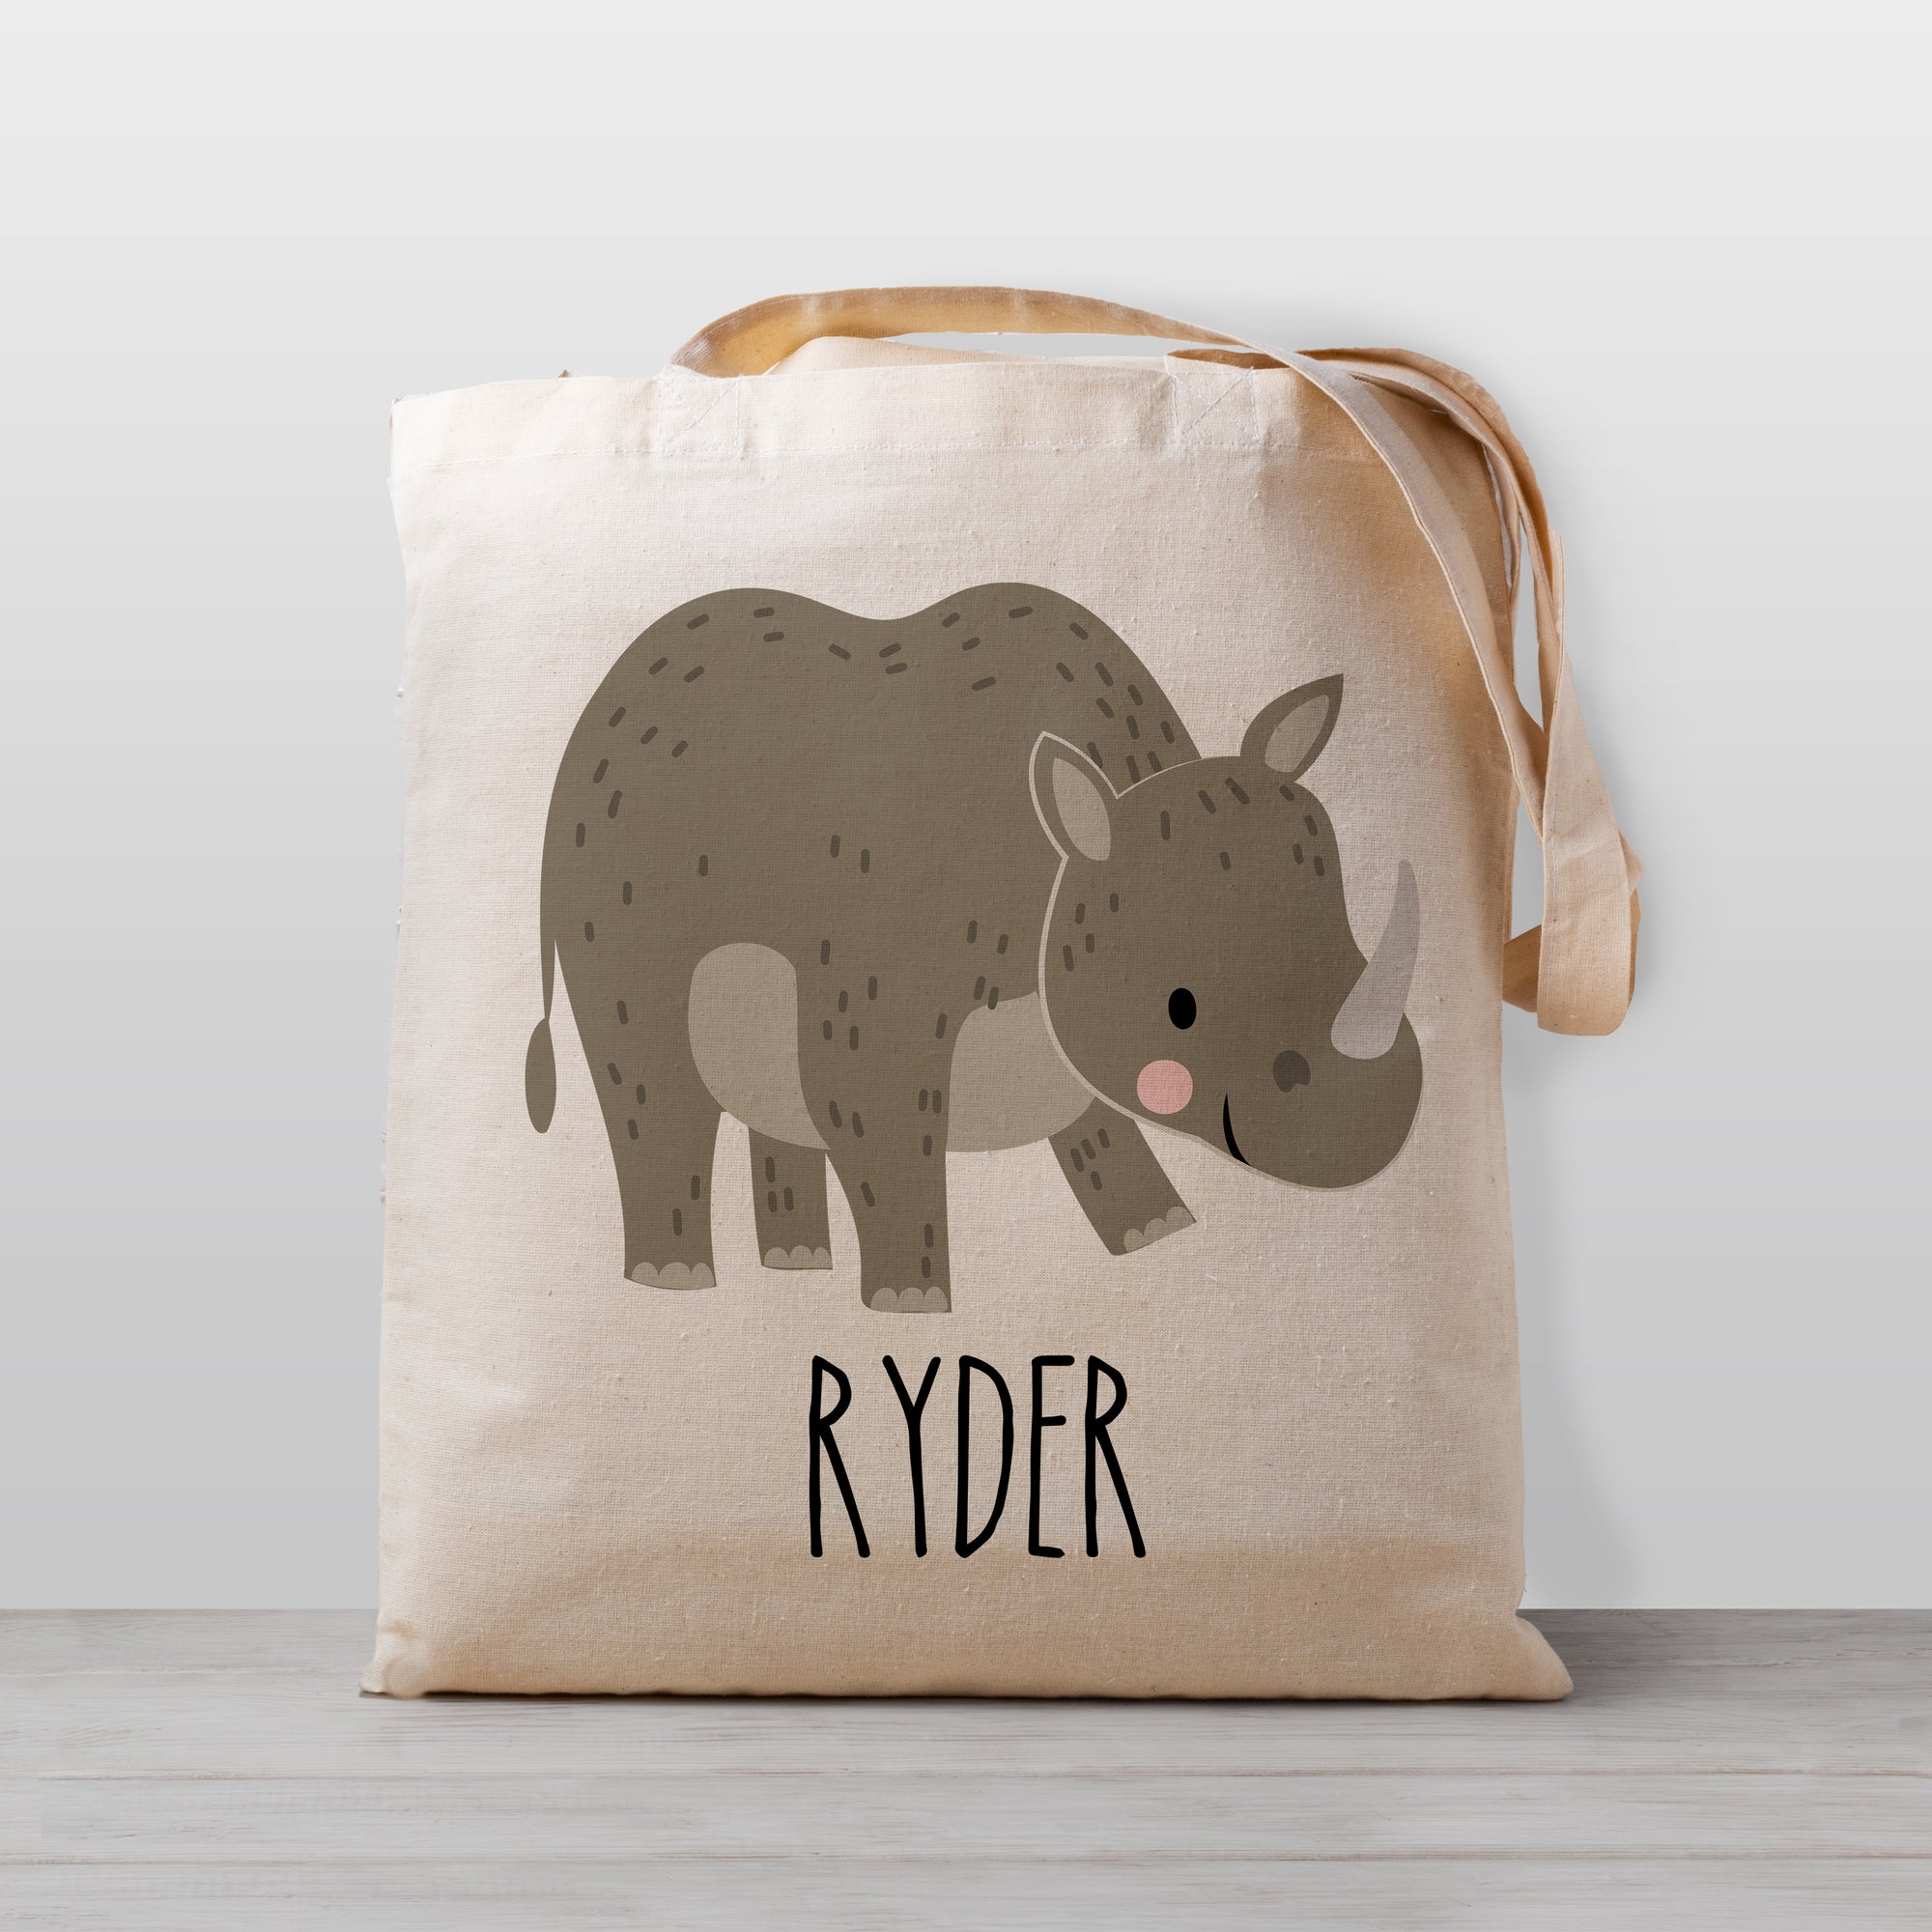 Rhinoceros personalized tote bag for kids, 100% cotton canvas, great for preschool, daycare, kindergarten, or as a library book bag